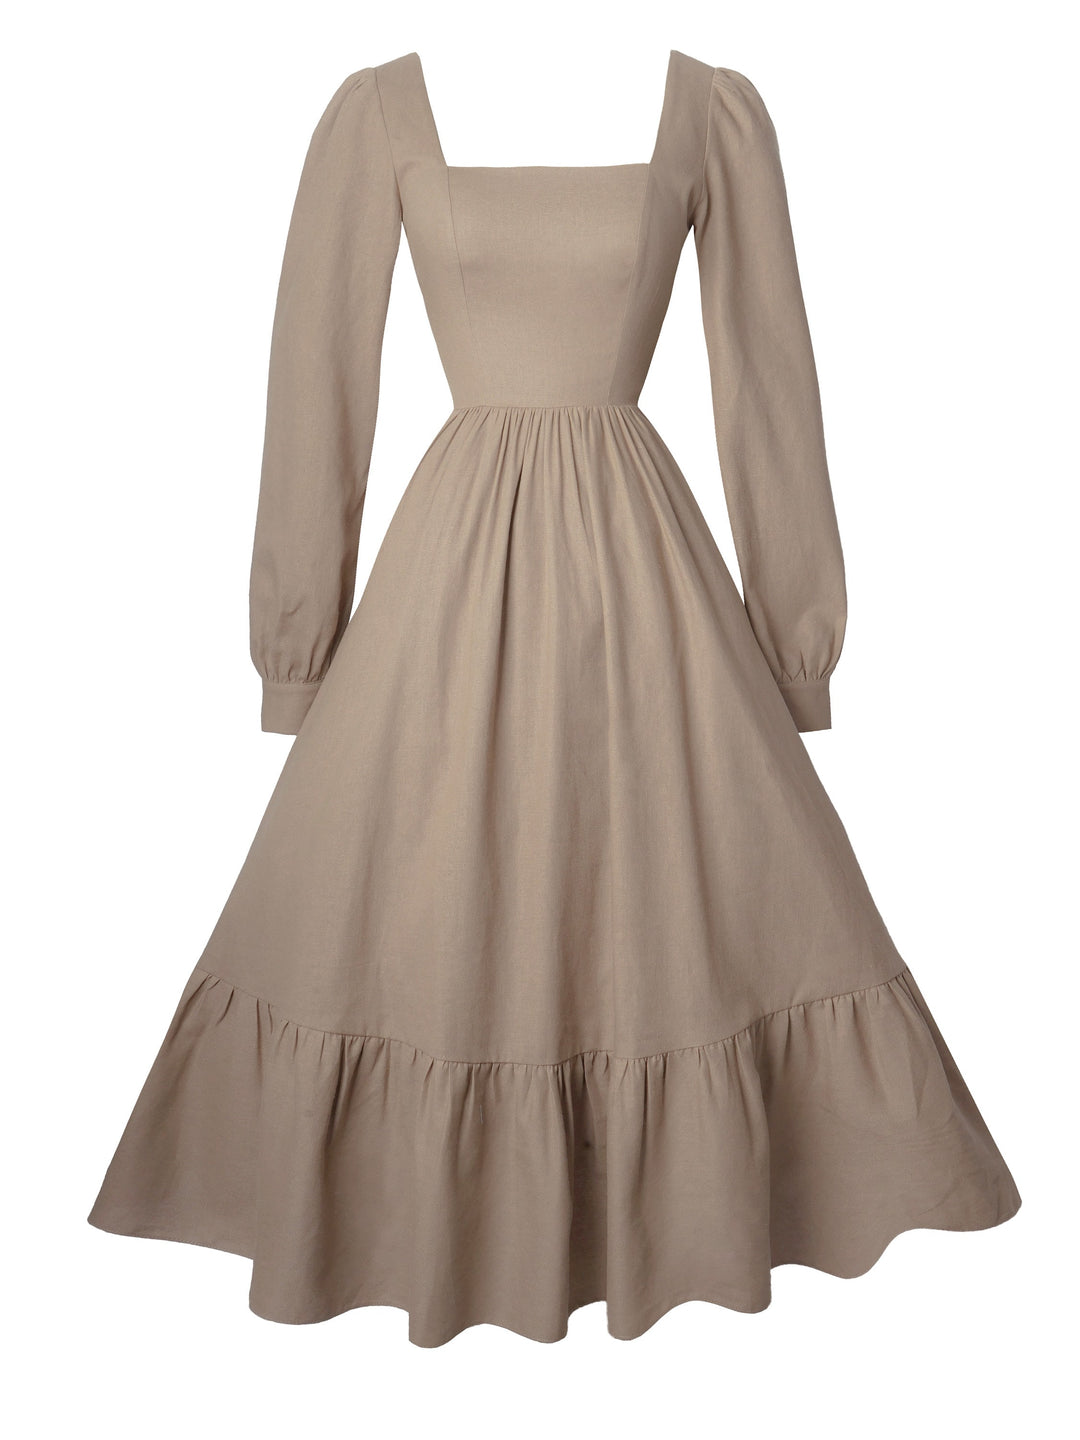 RTS - Size S - Mary Dress in Sephia Linen